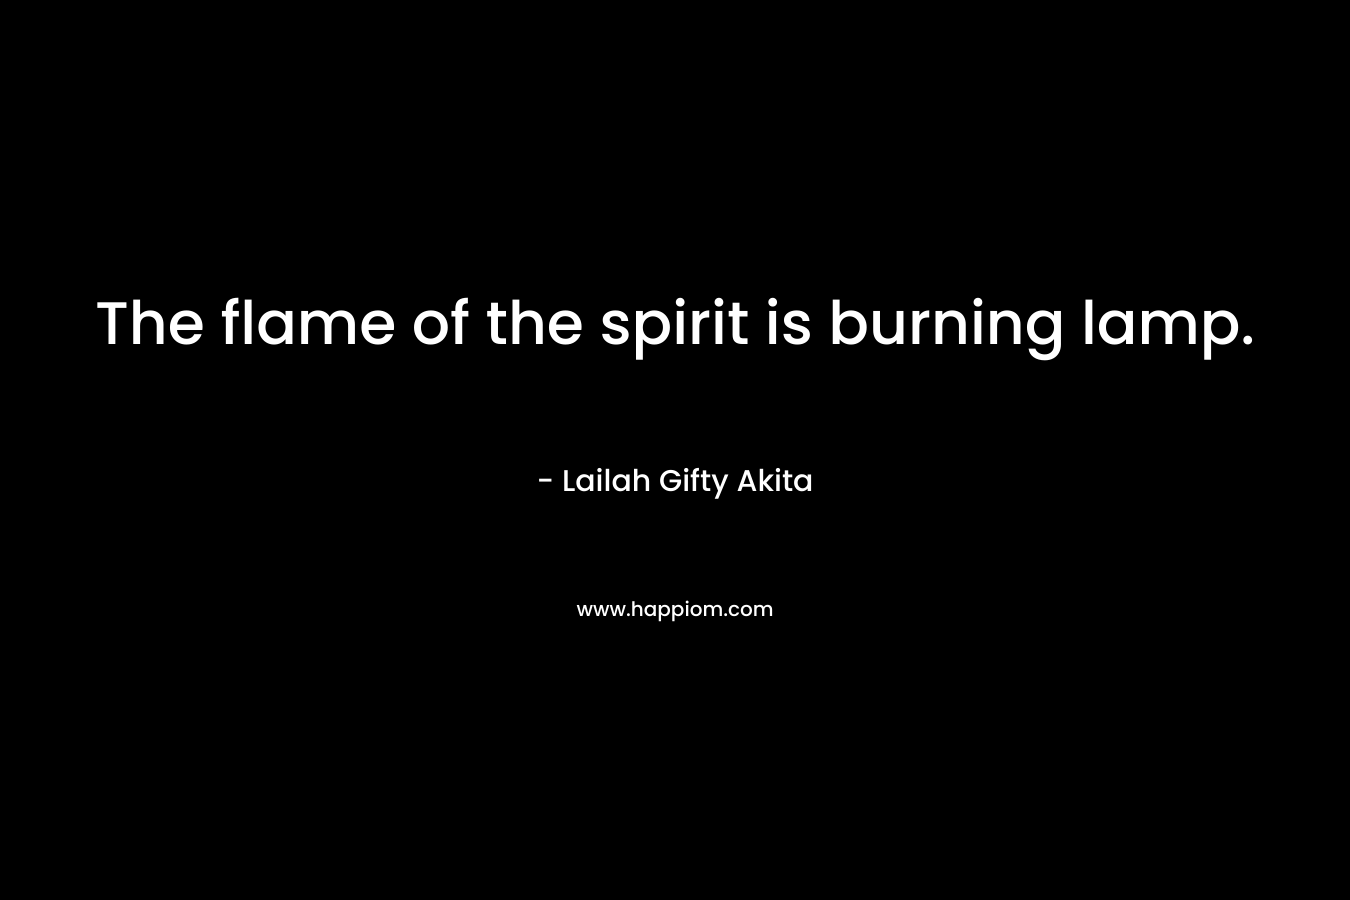 The flame of the spirit is burning lamp.